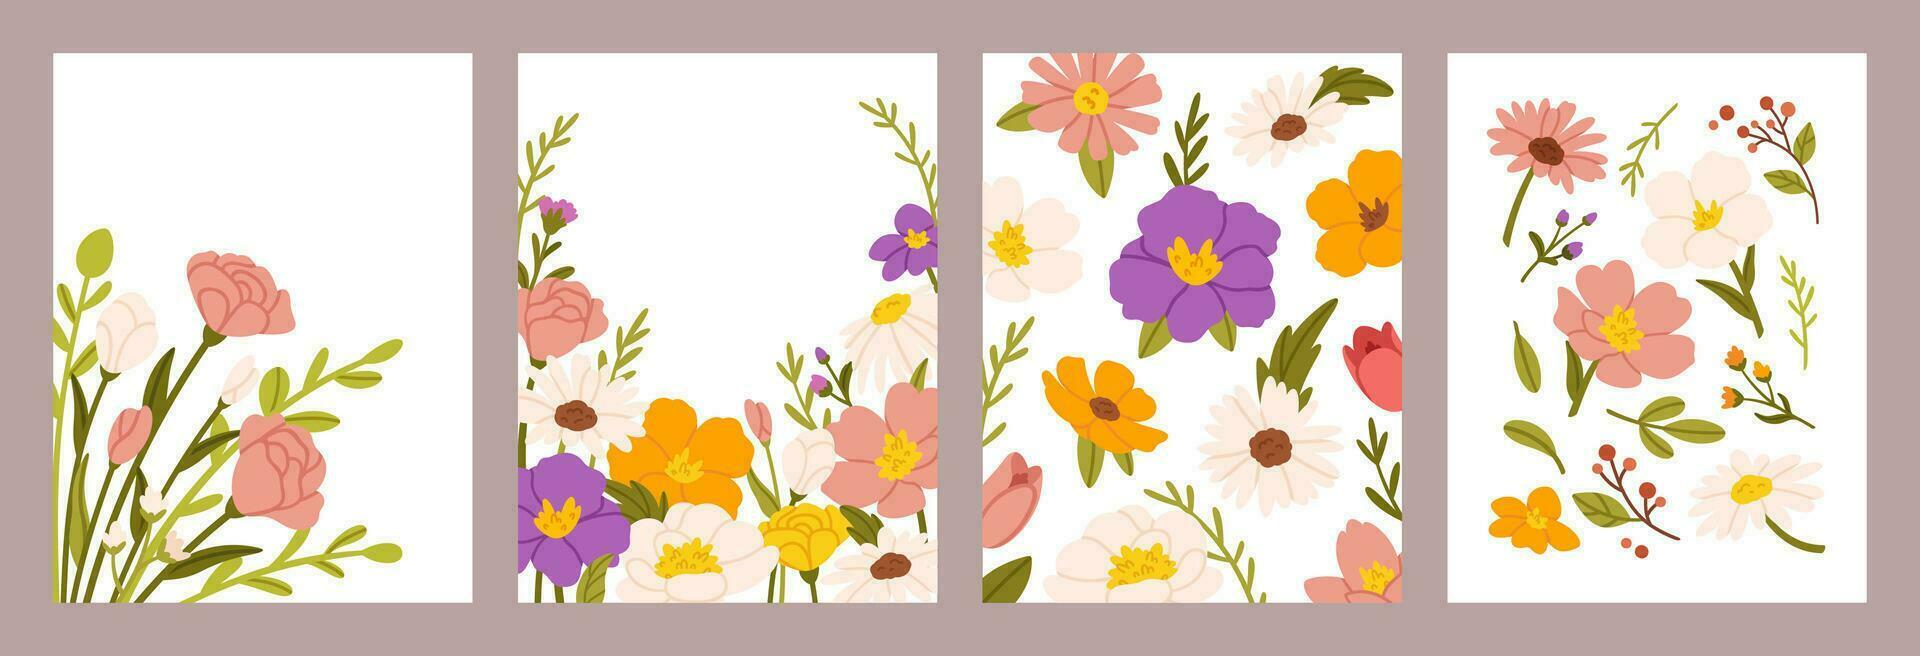 Spring flowers poster. Wildflowers floral valentines day cards. Women and Mothers day abstracts design. Wedding template banners with blooming flower. Vector set